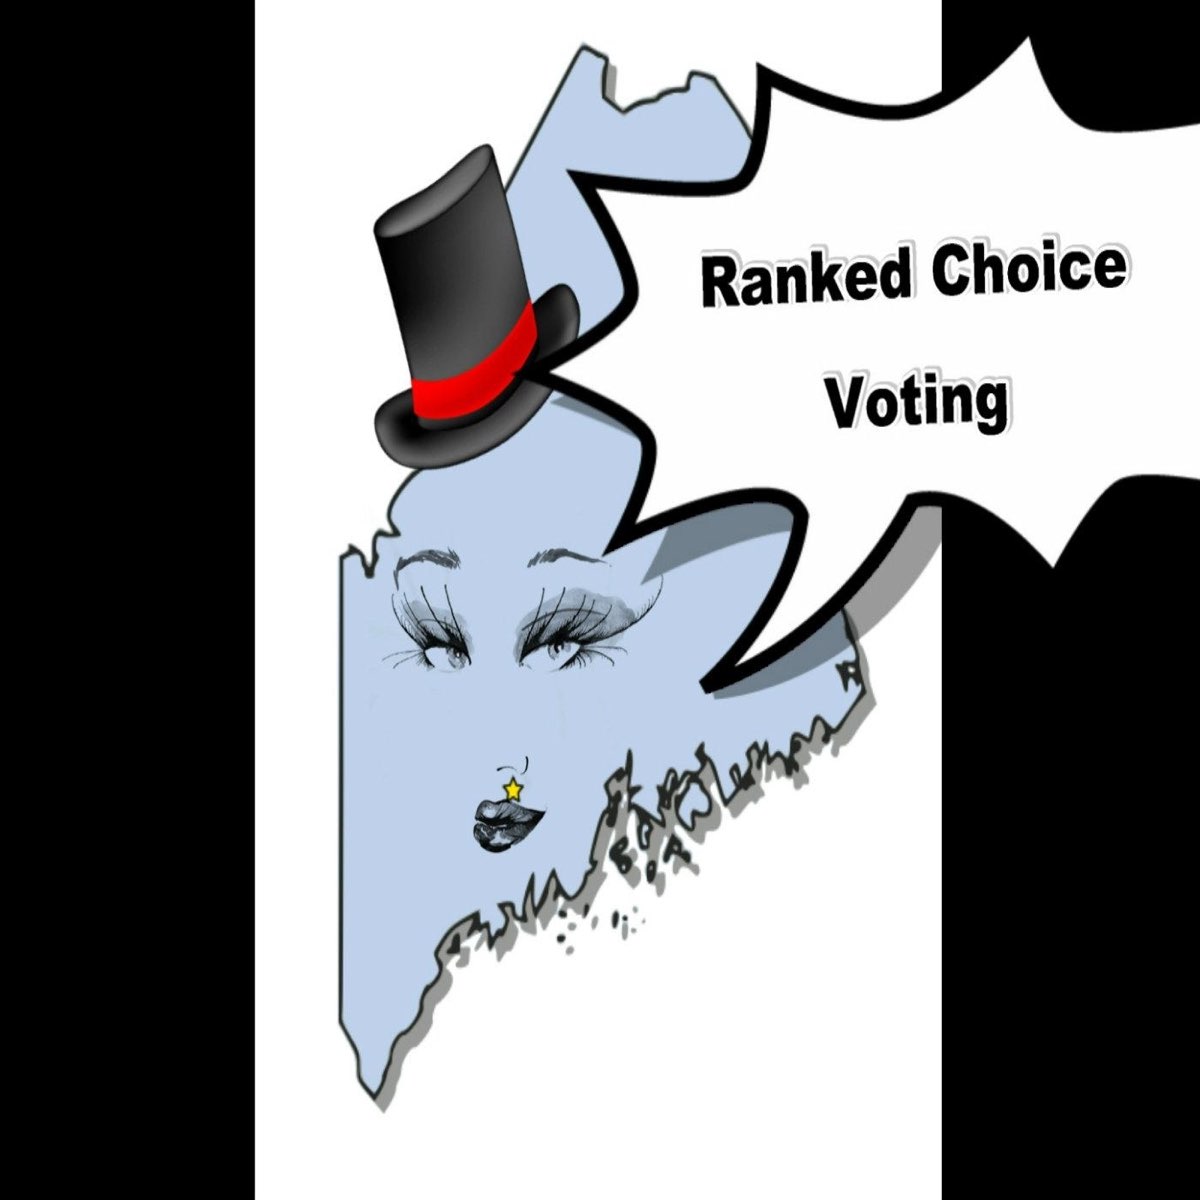 King choice voting. Ranked choice voting.